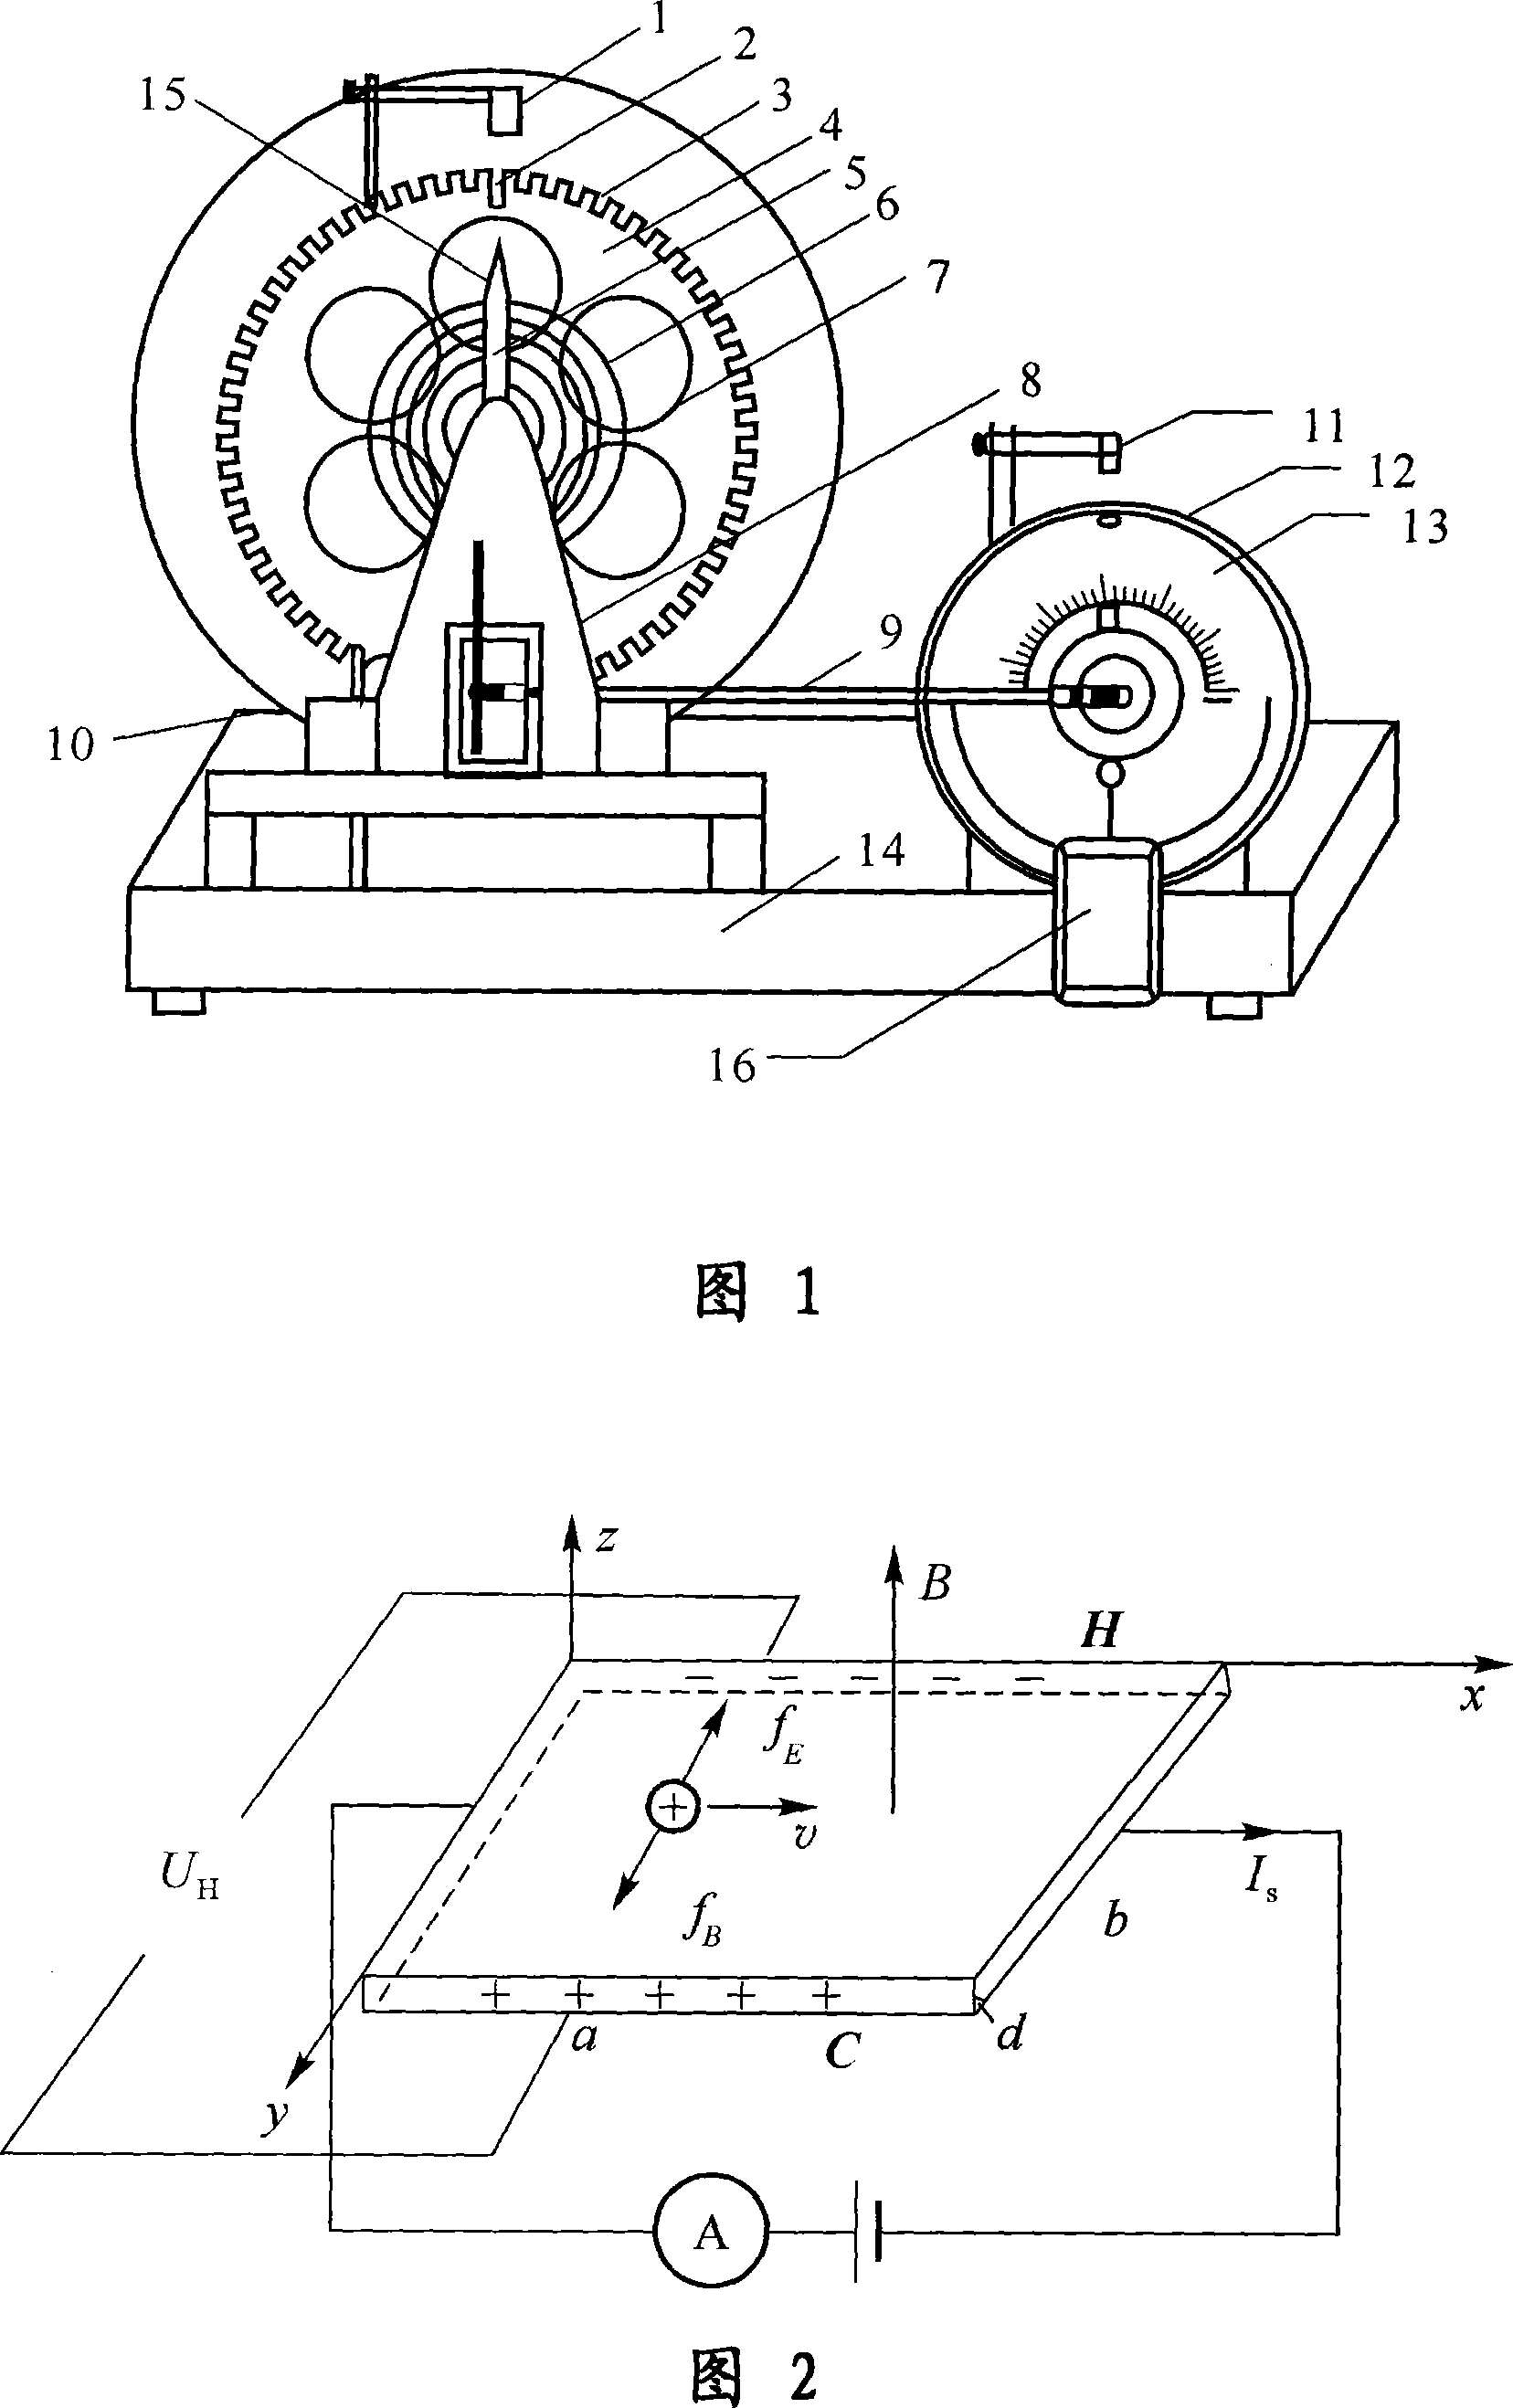 Method for collecting boer resonance instrument movement state data based on hall element